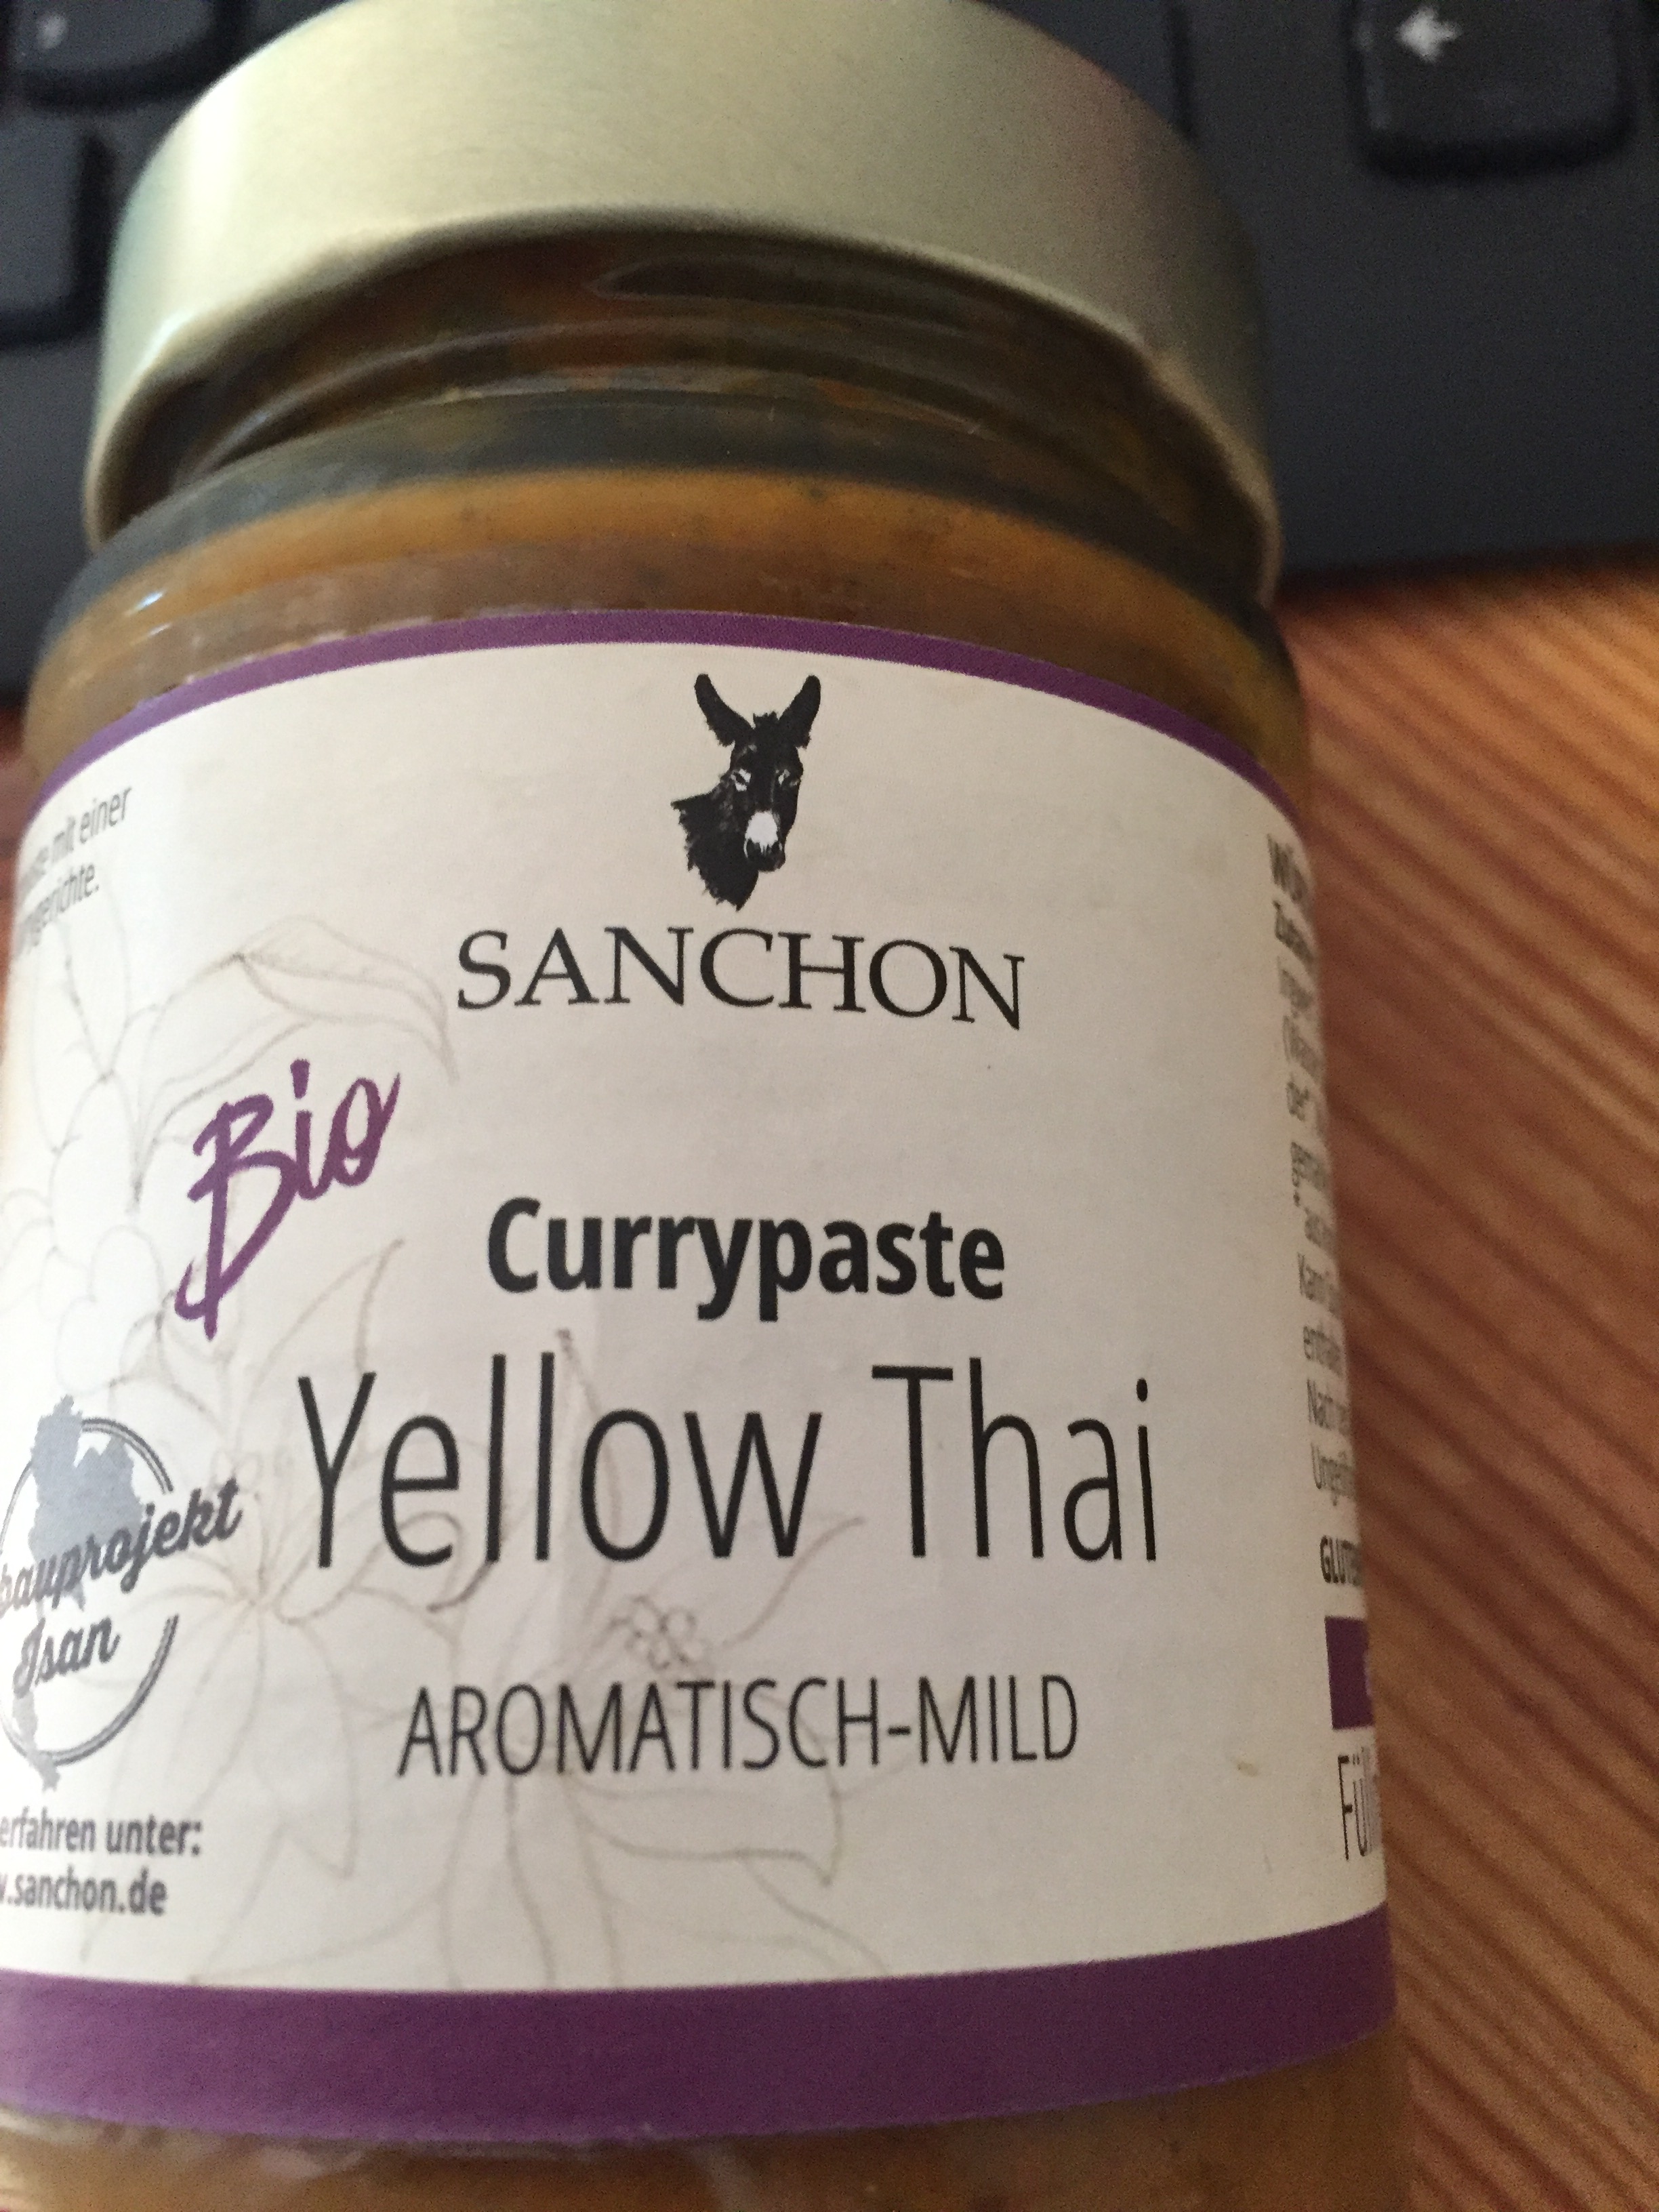 Currypaste Yellow